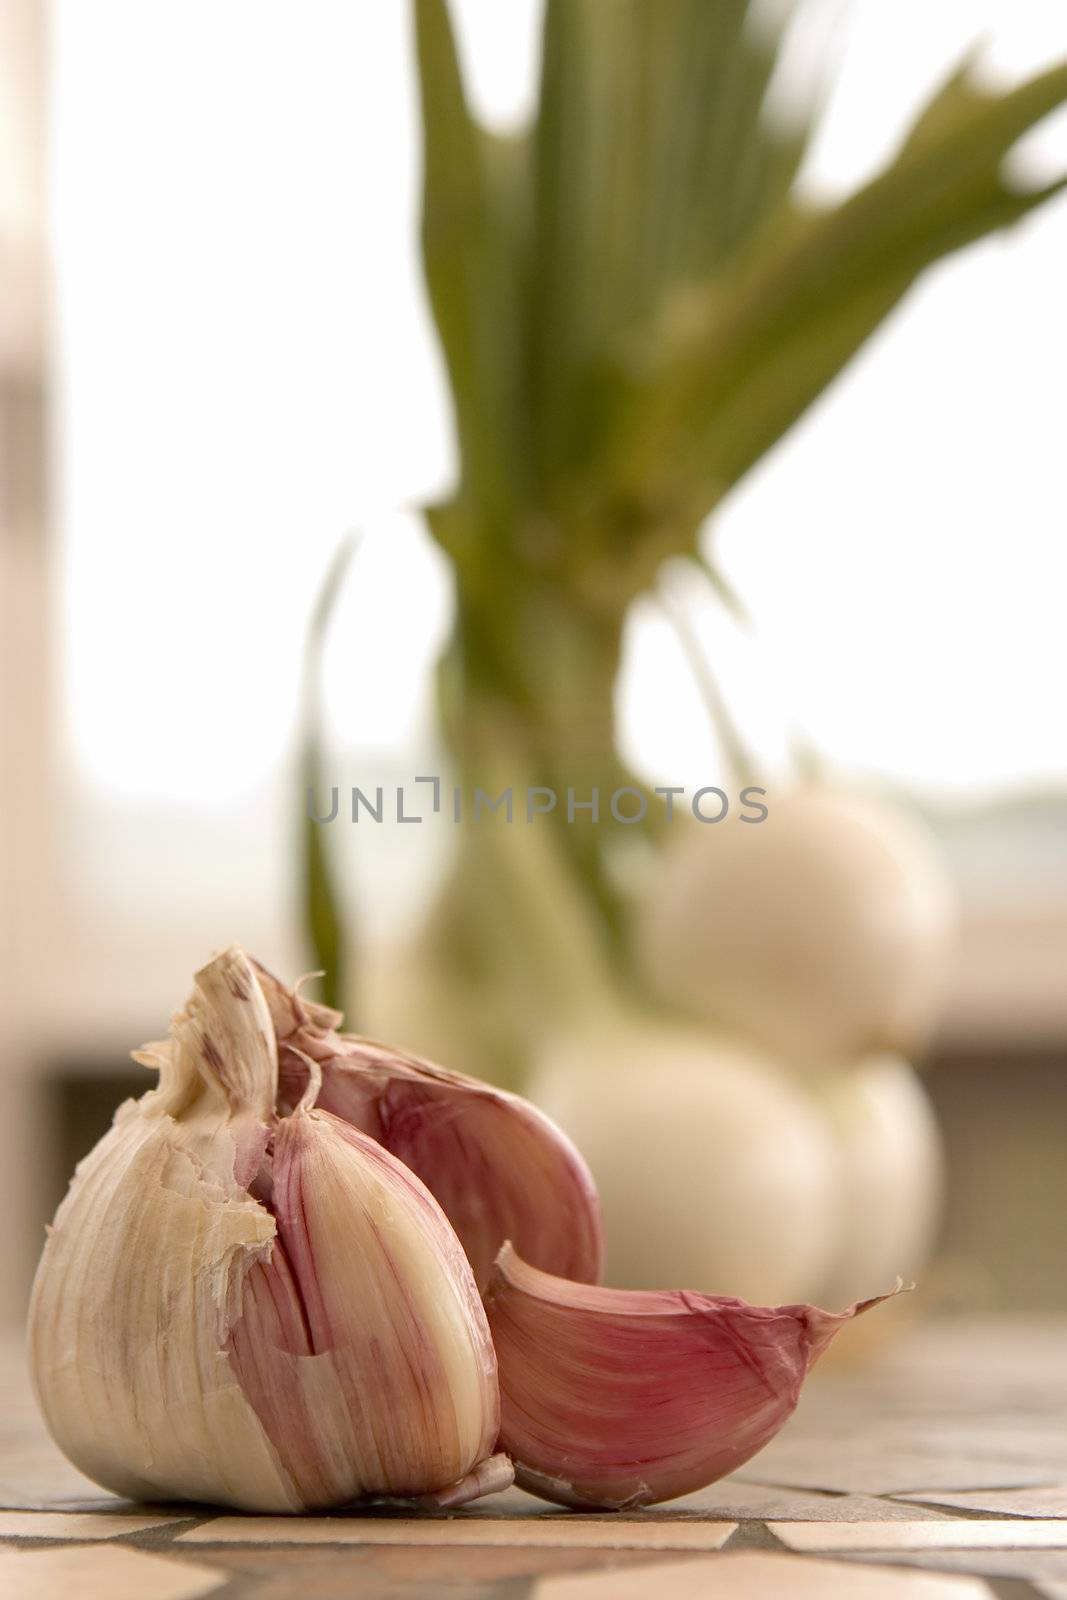 Some segments of garlic lay on a kitchen table
